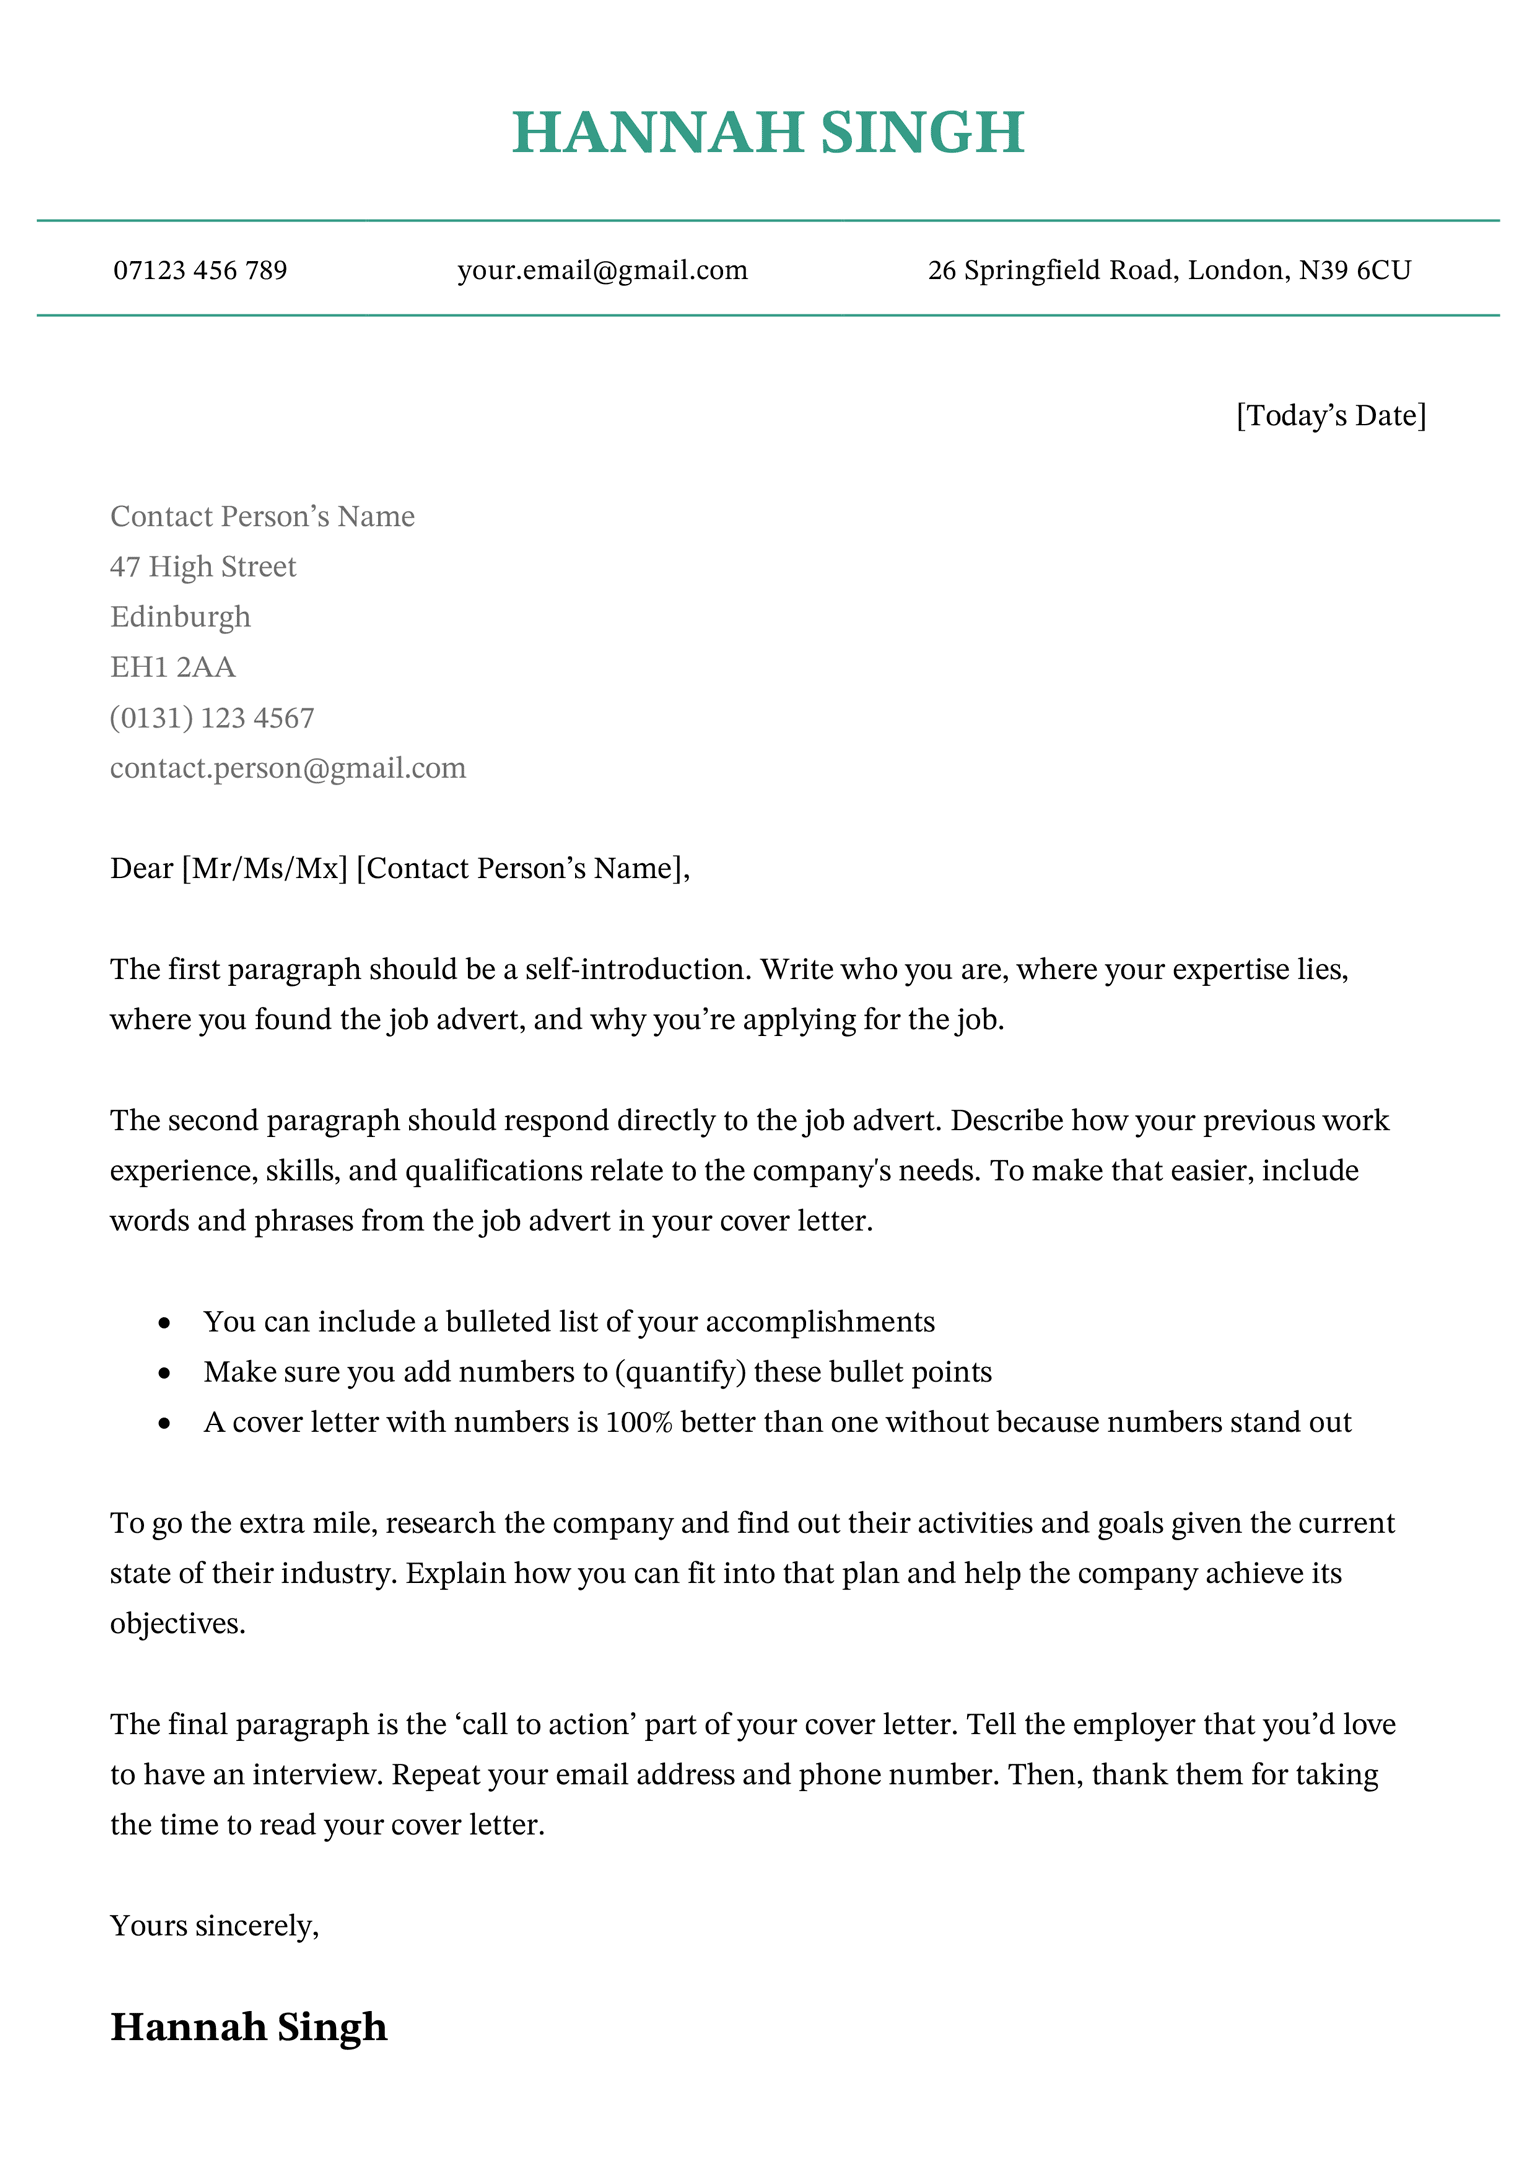 The Birmingham cover letter template in green.